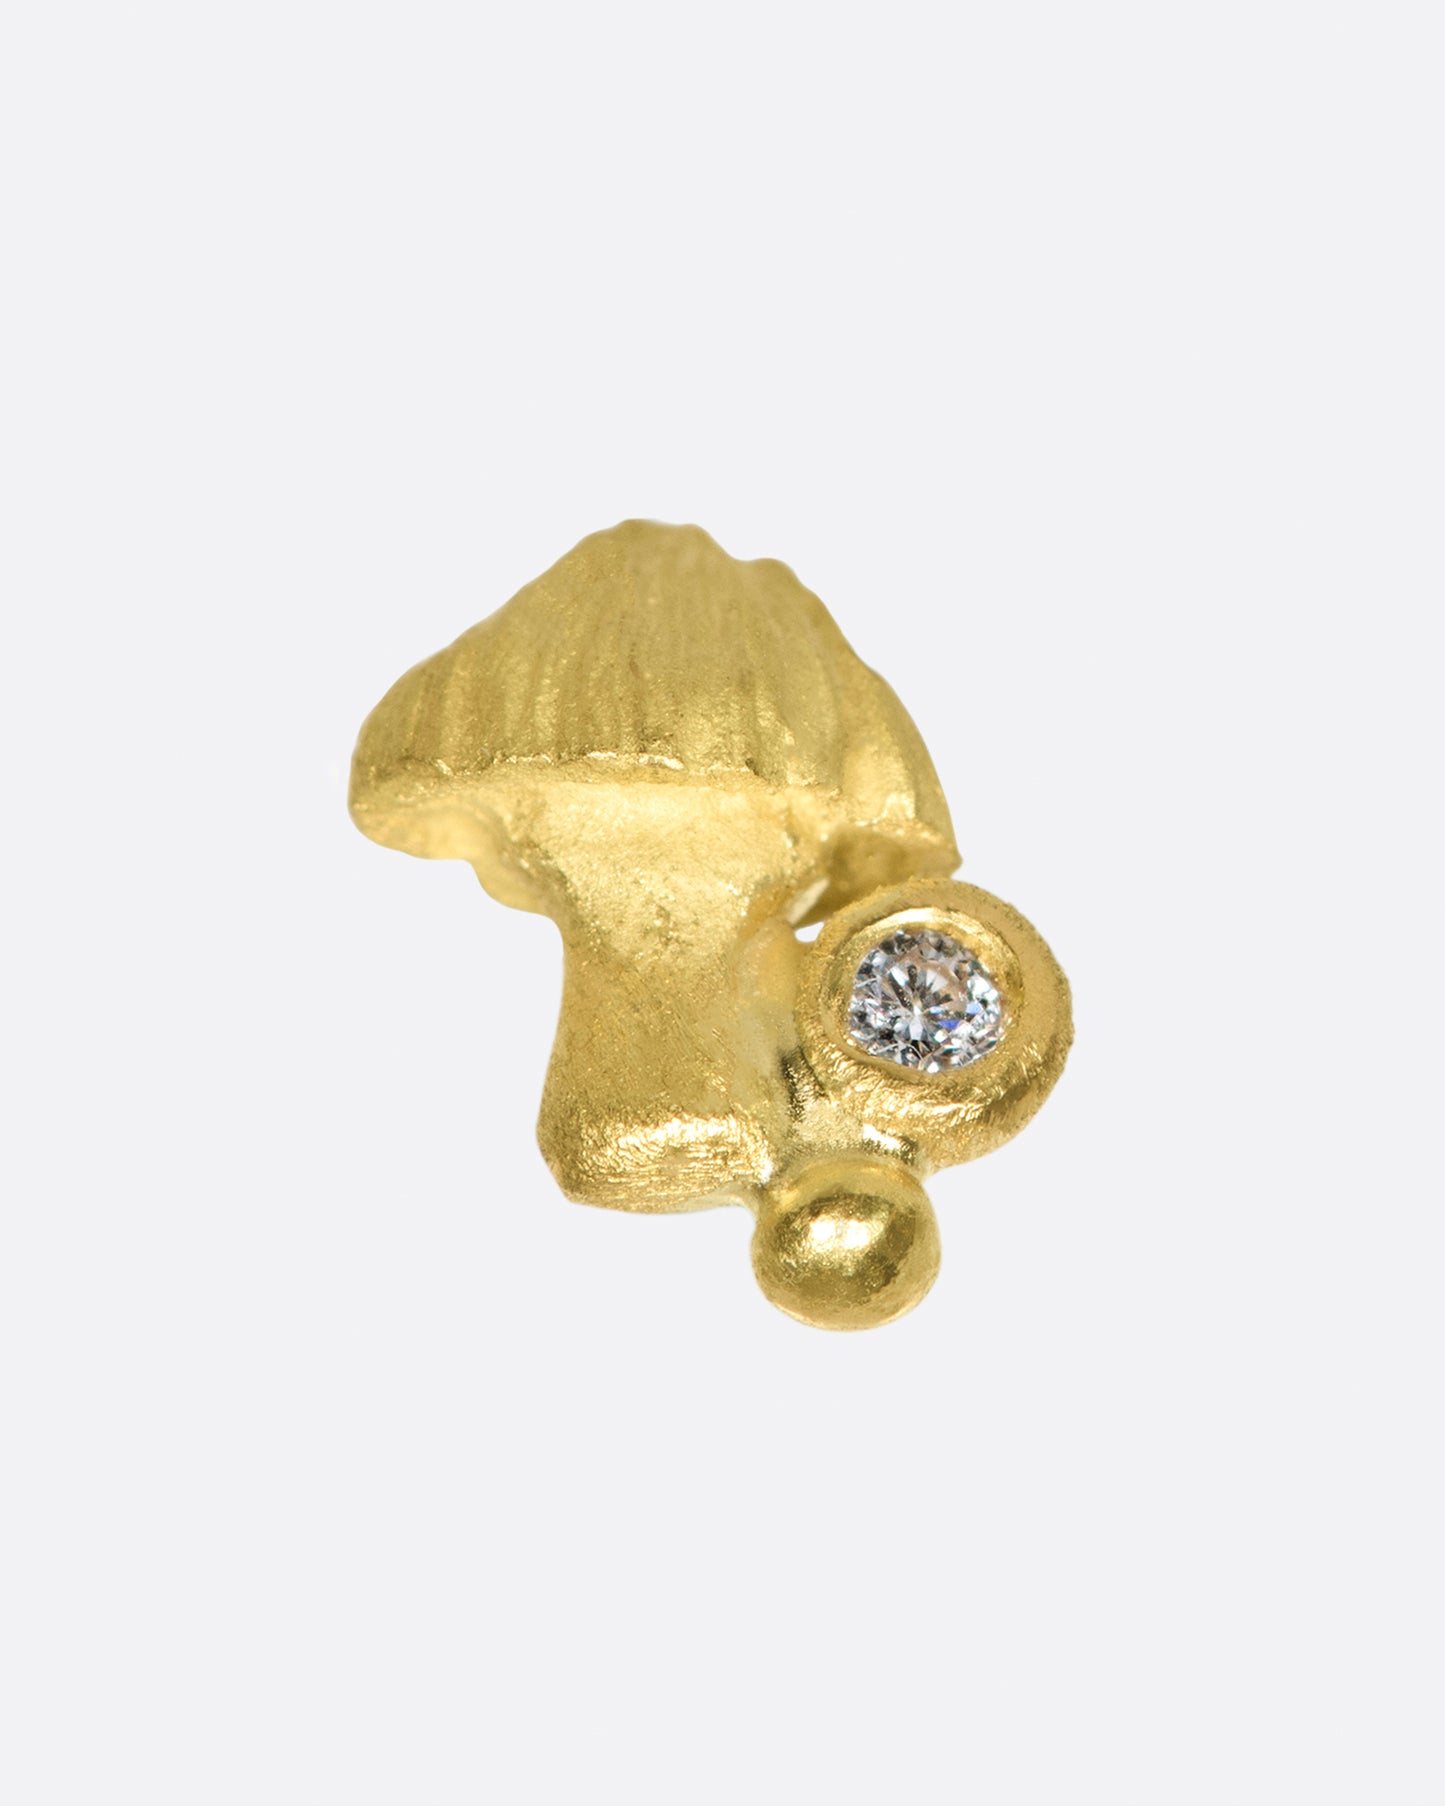 Matte gold and hand carved, this little fungus remains subtle on the ear.